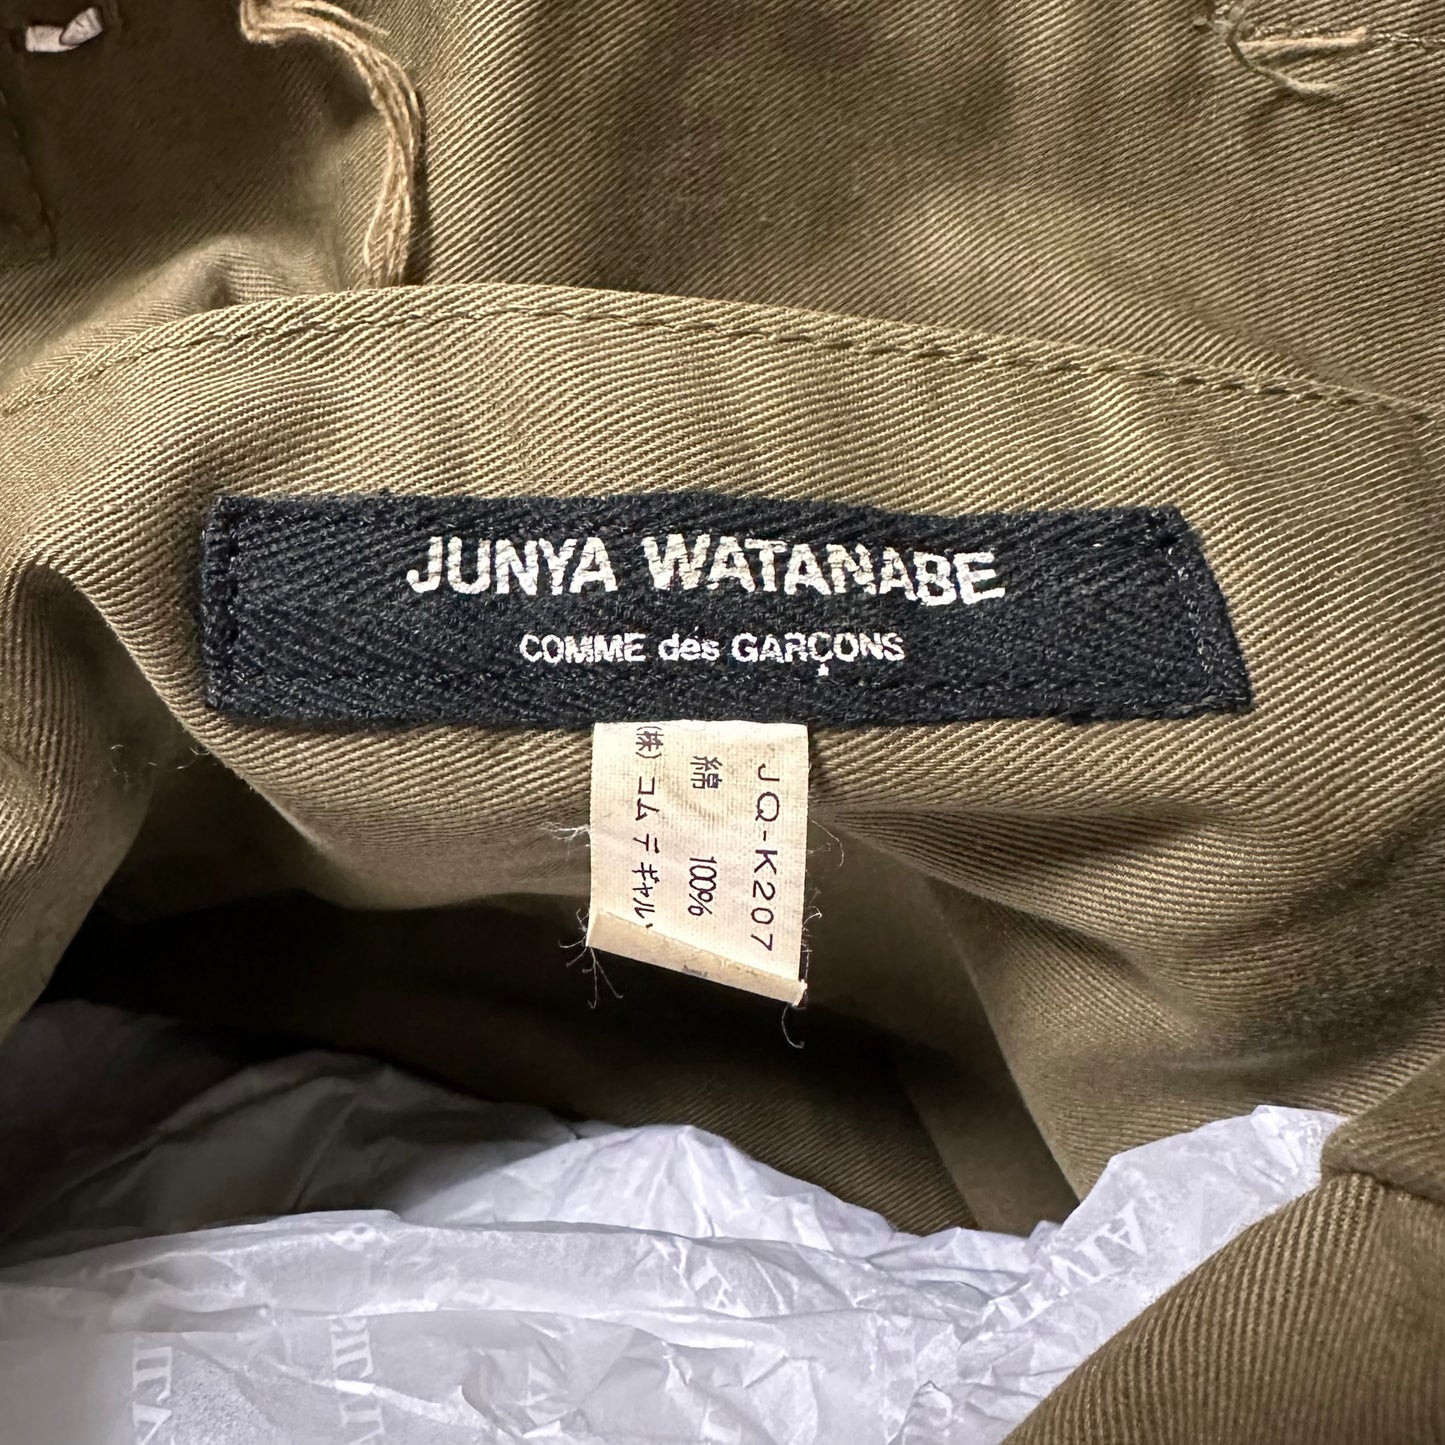 JUNYA WATANABE Fall Winter 2006 Studs Camouflage Patchwork Tote Bag